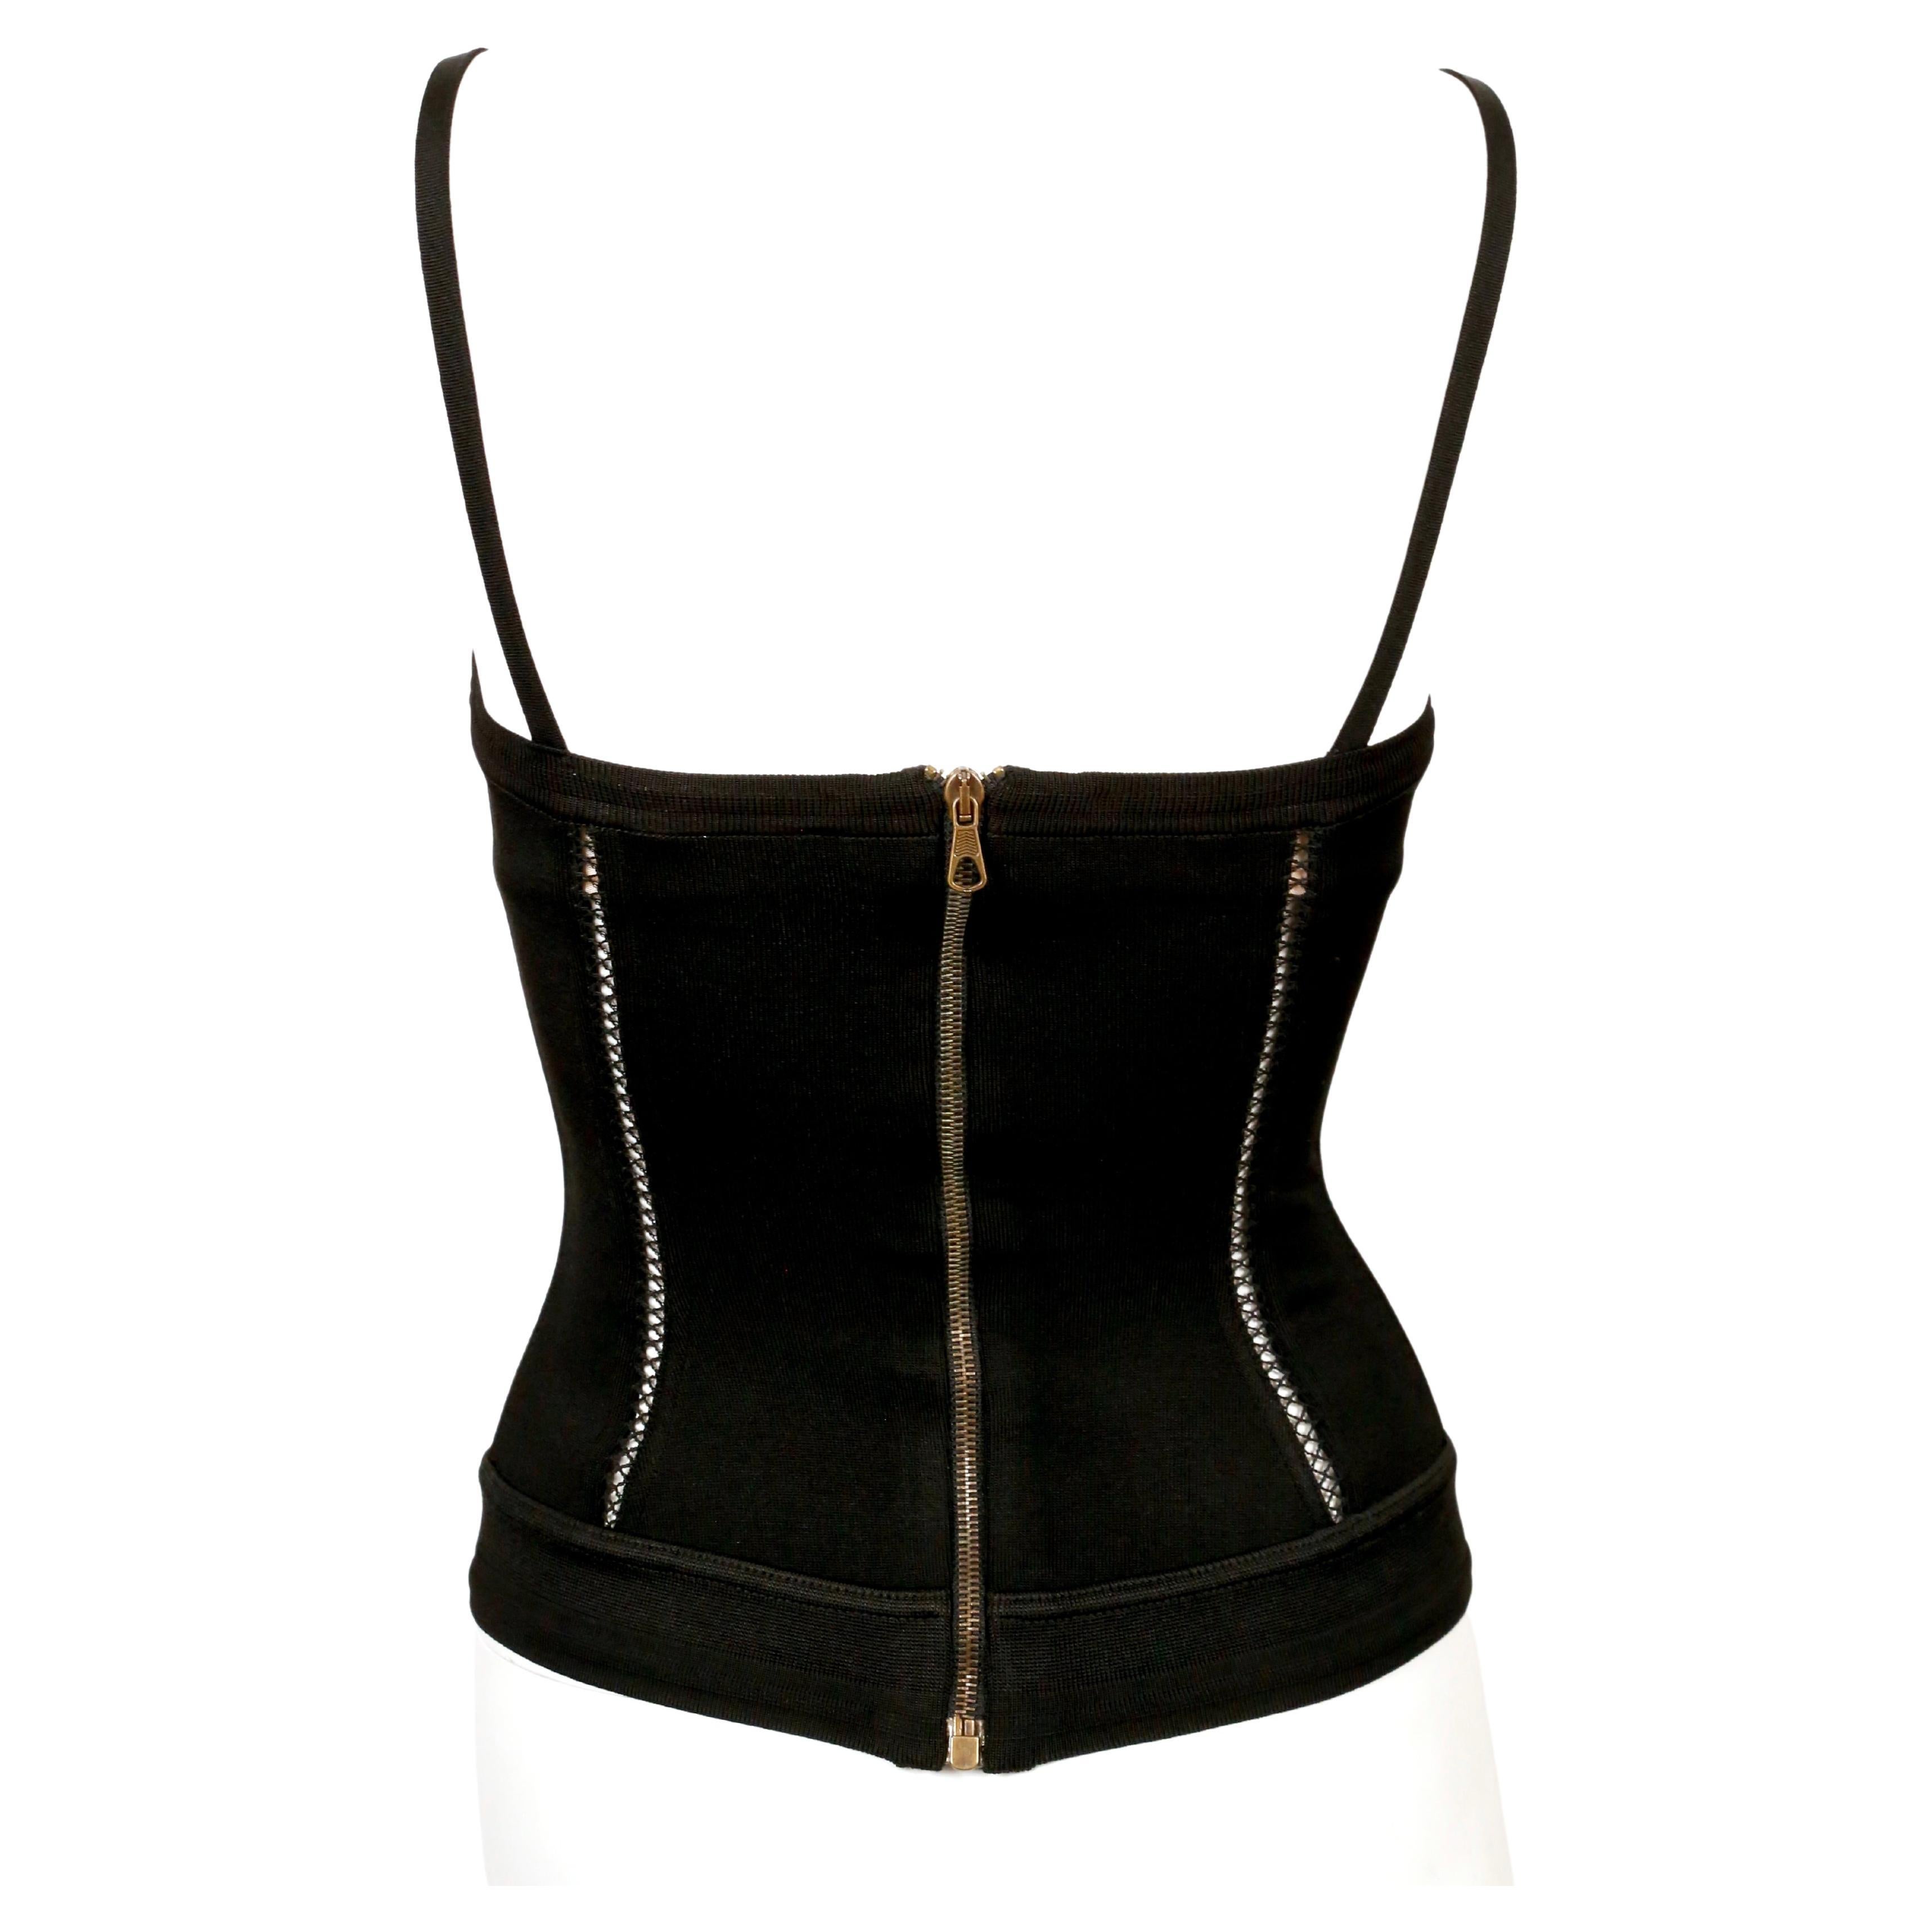 1991 AZZEDINE ALAIA black bustier corset RUNWAY top In Excellent Condition For Sale In San Fransisco, CA